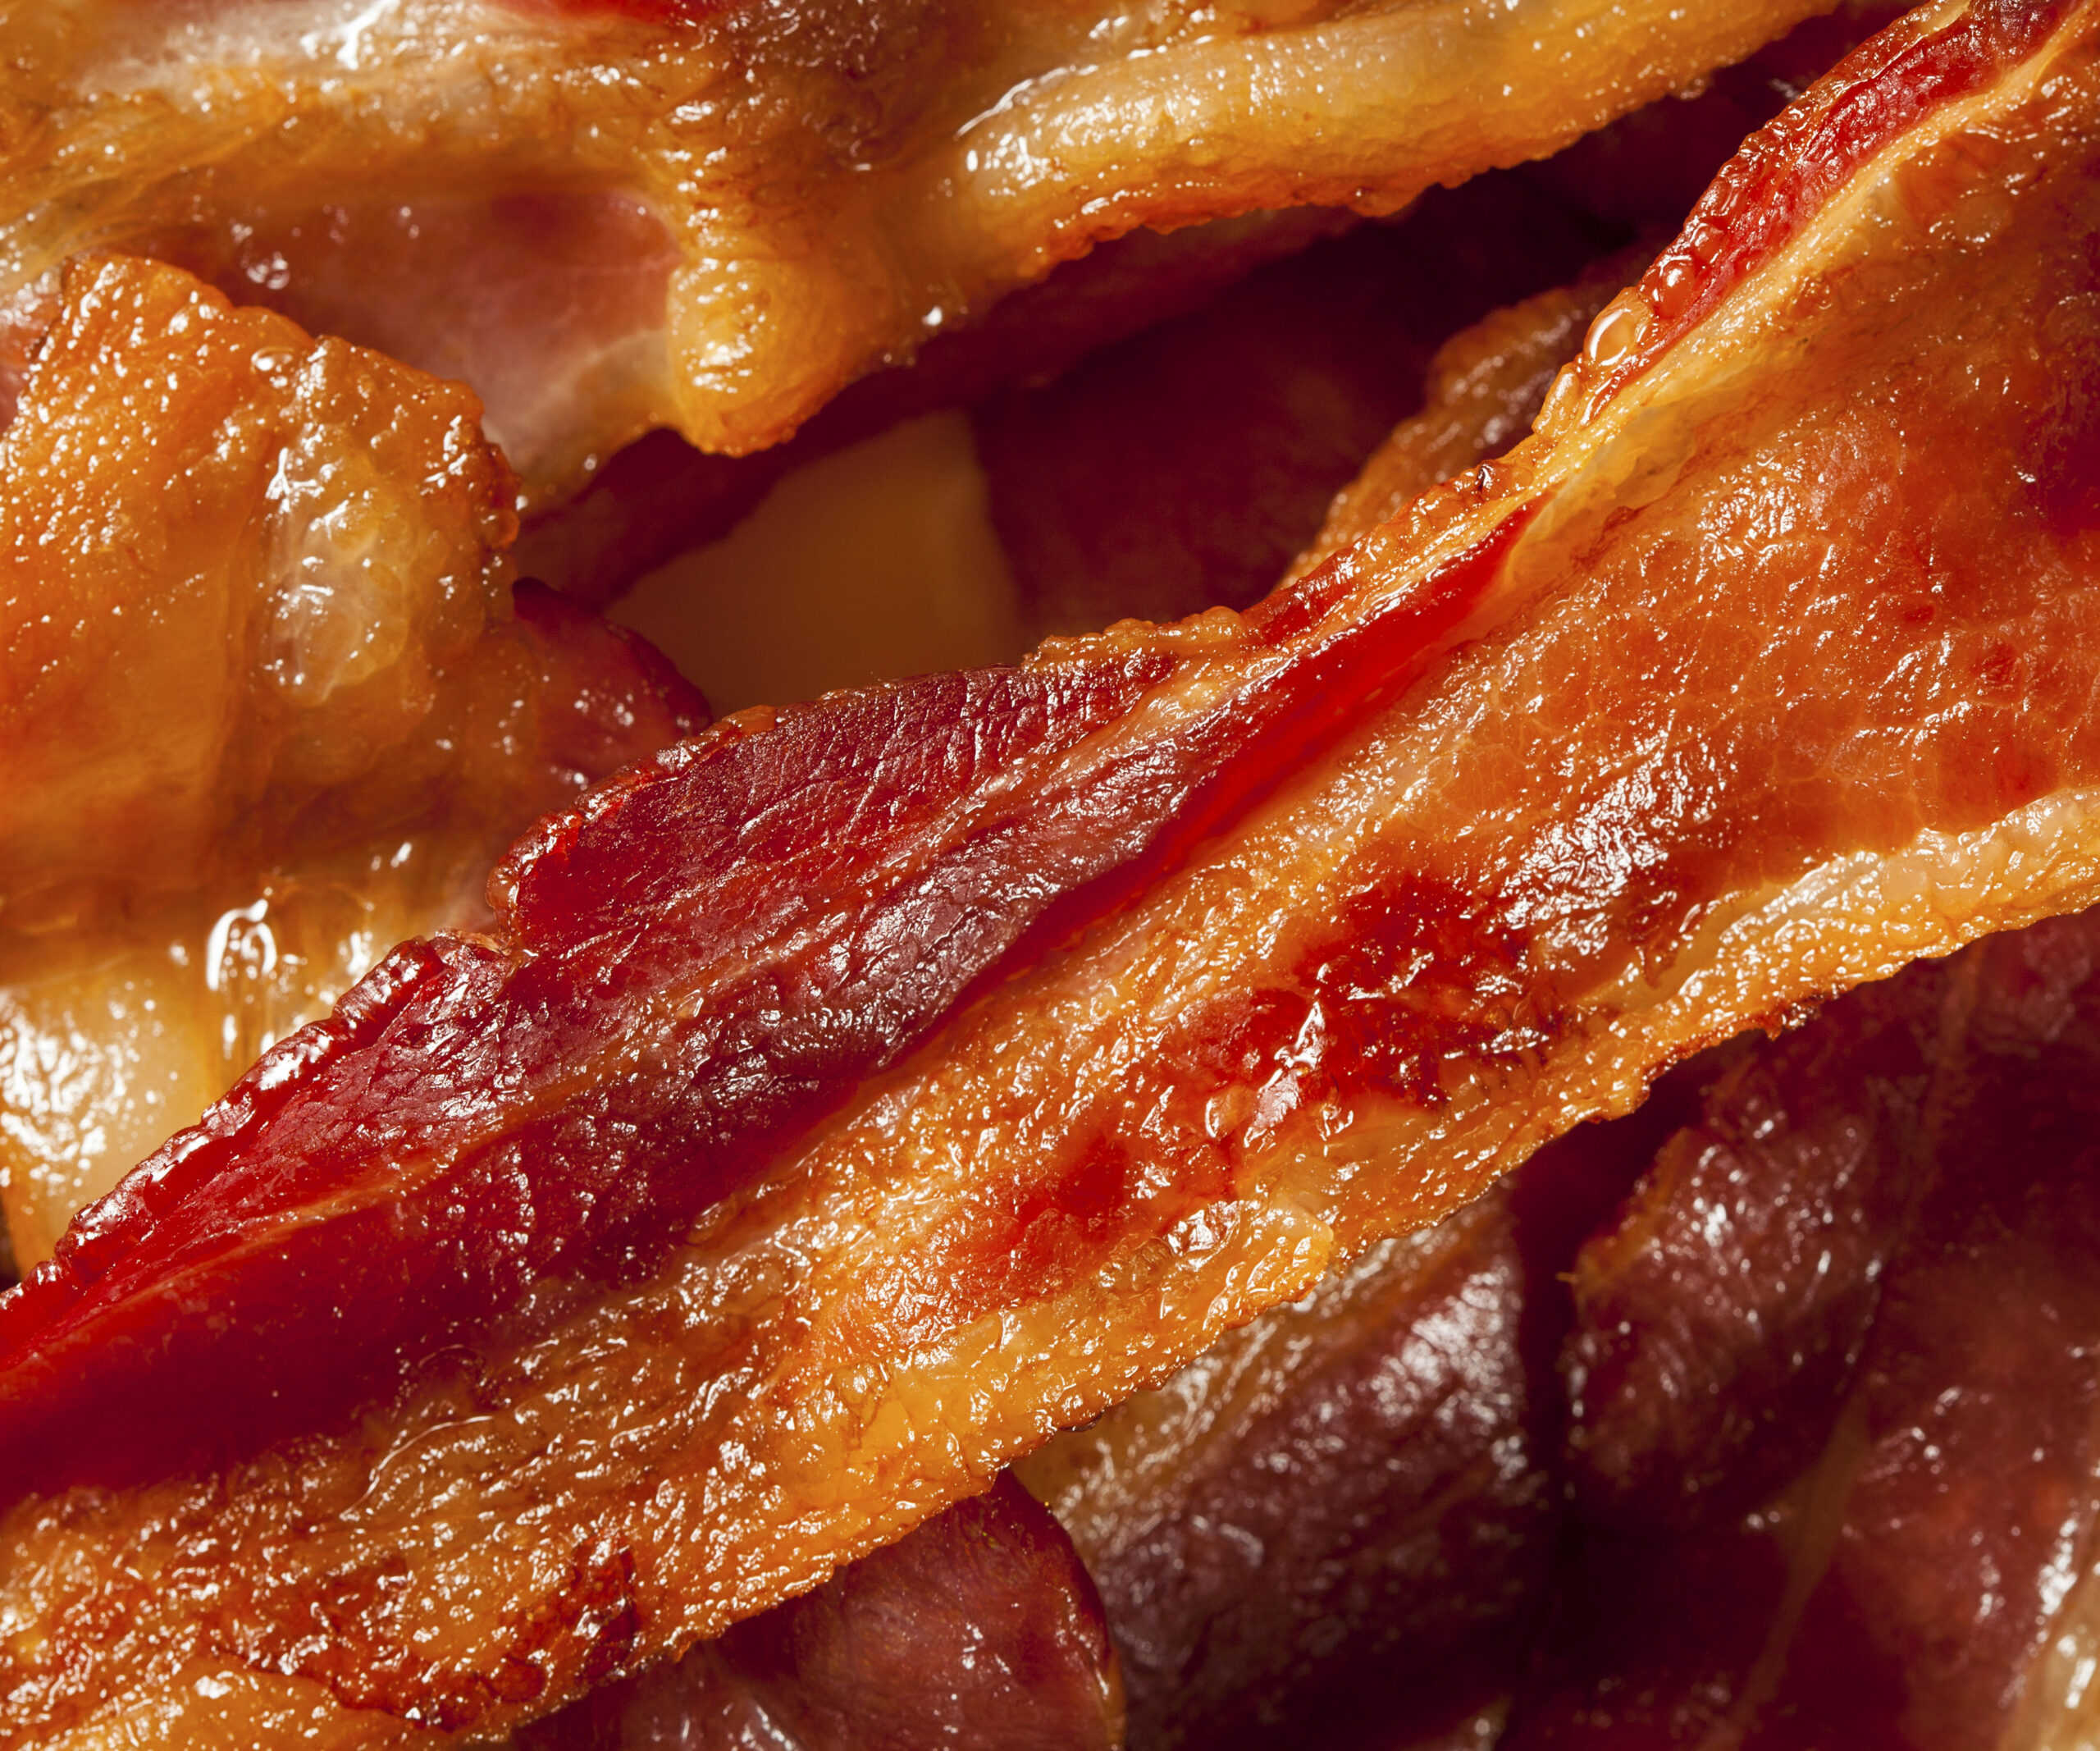 Save Our Bacon: The truth about meat and cancer